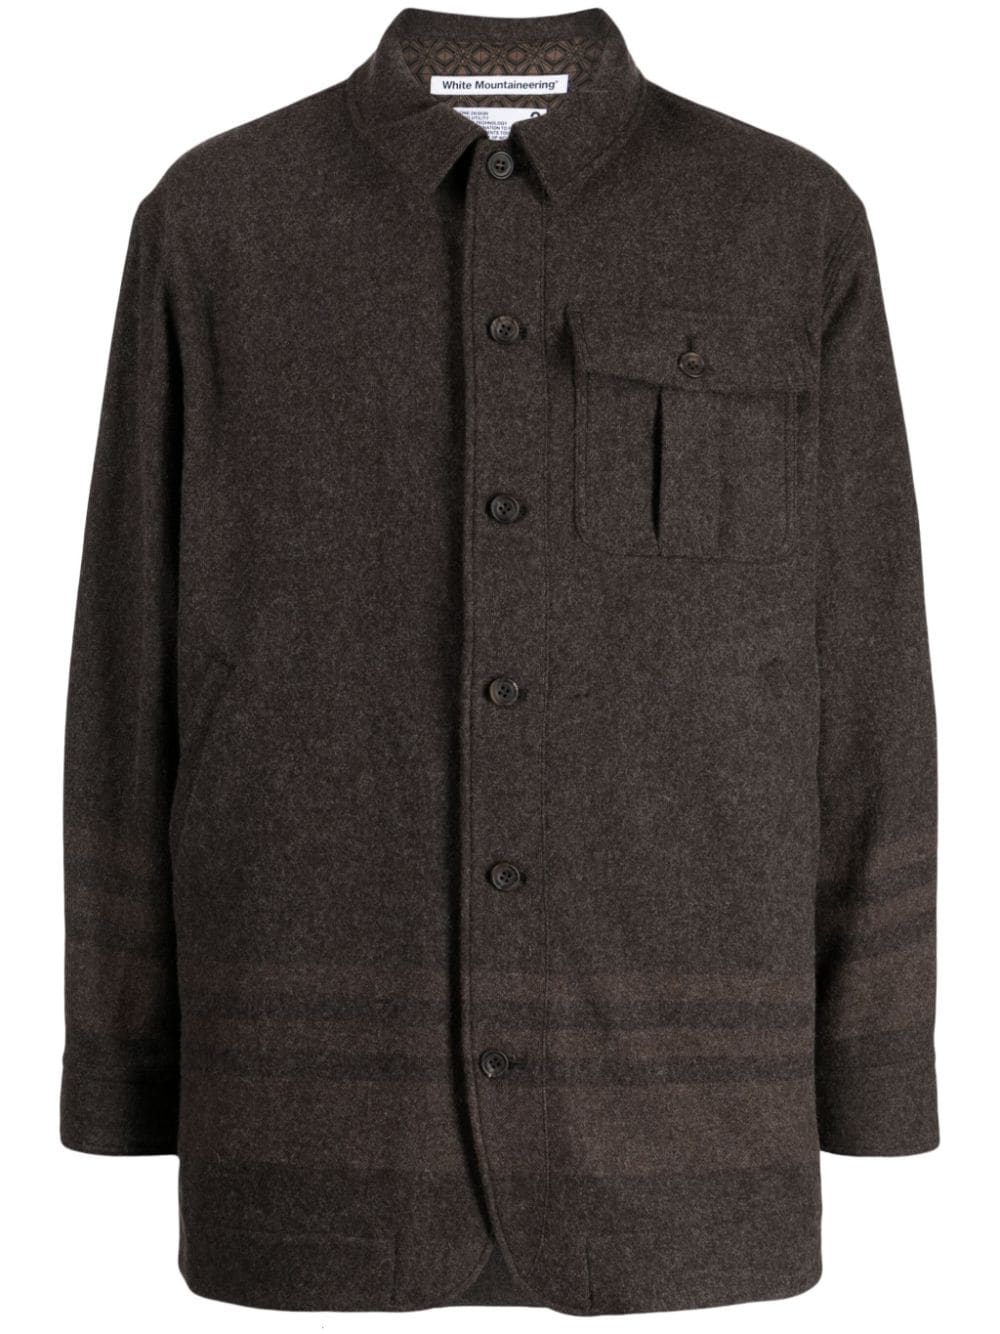 White Mountaineering classic-collar button-up jacket - Grigio